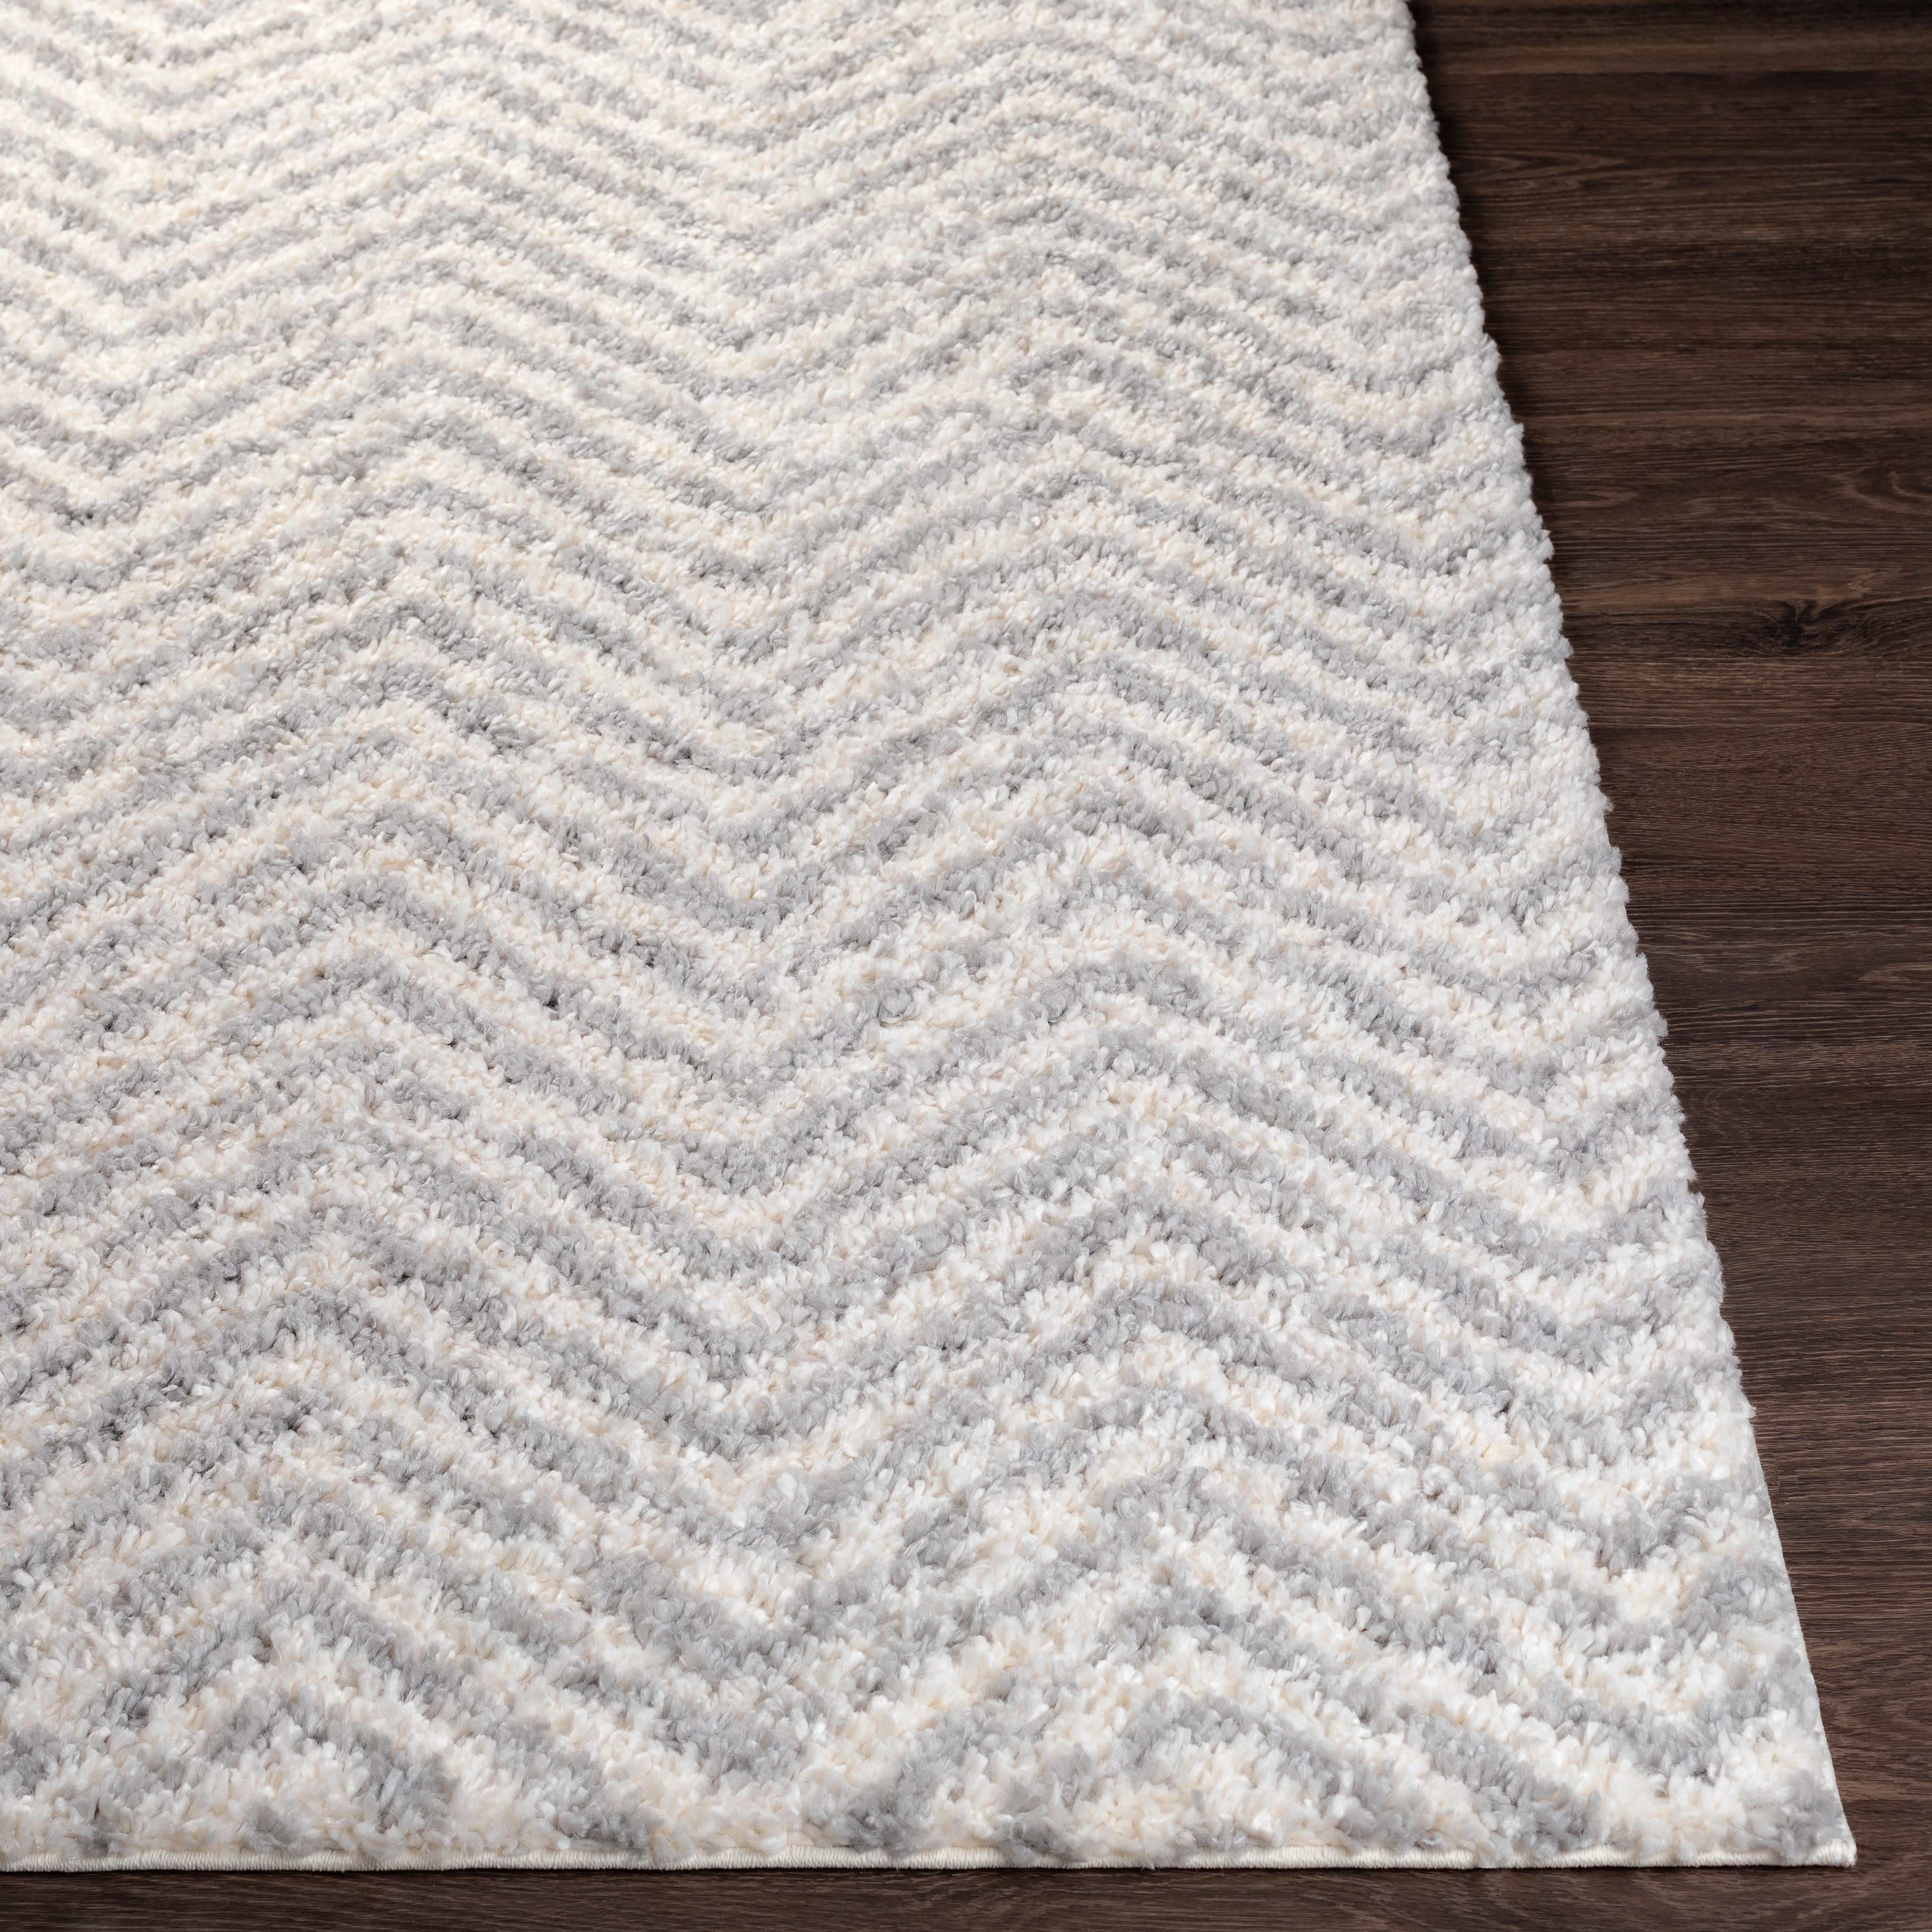 Deluxe Shag Rug, 2' x 3' - Image 2